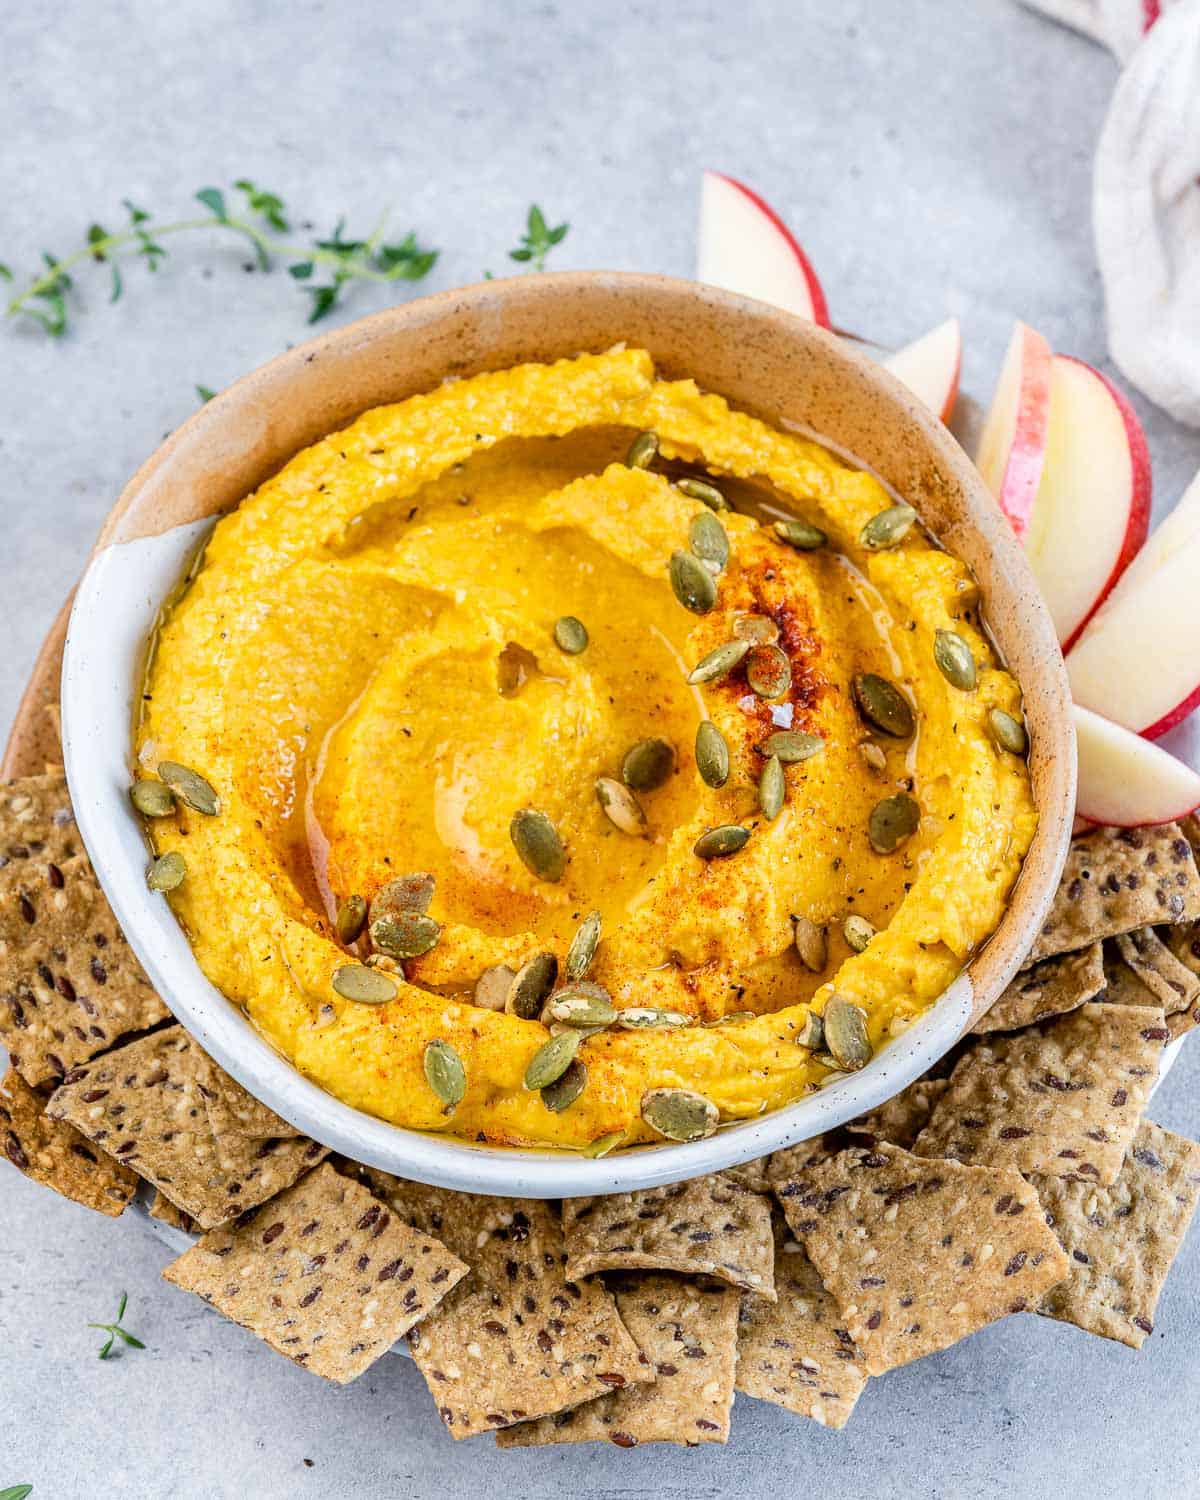 Pumpkin hummus topped with pumpkin seeds and served with crackers and apple slices.